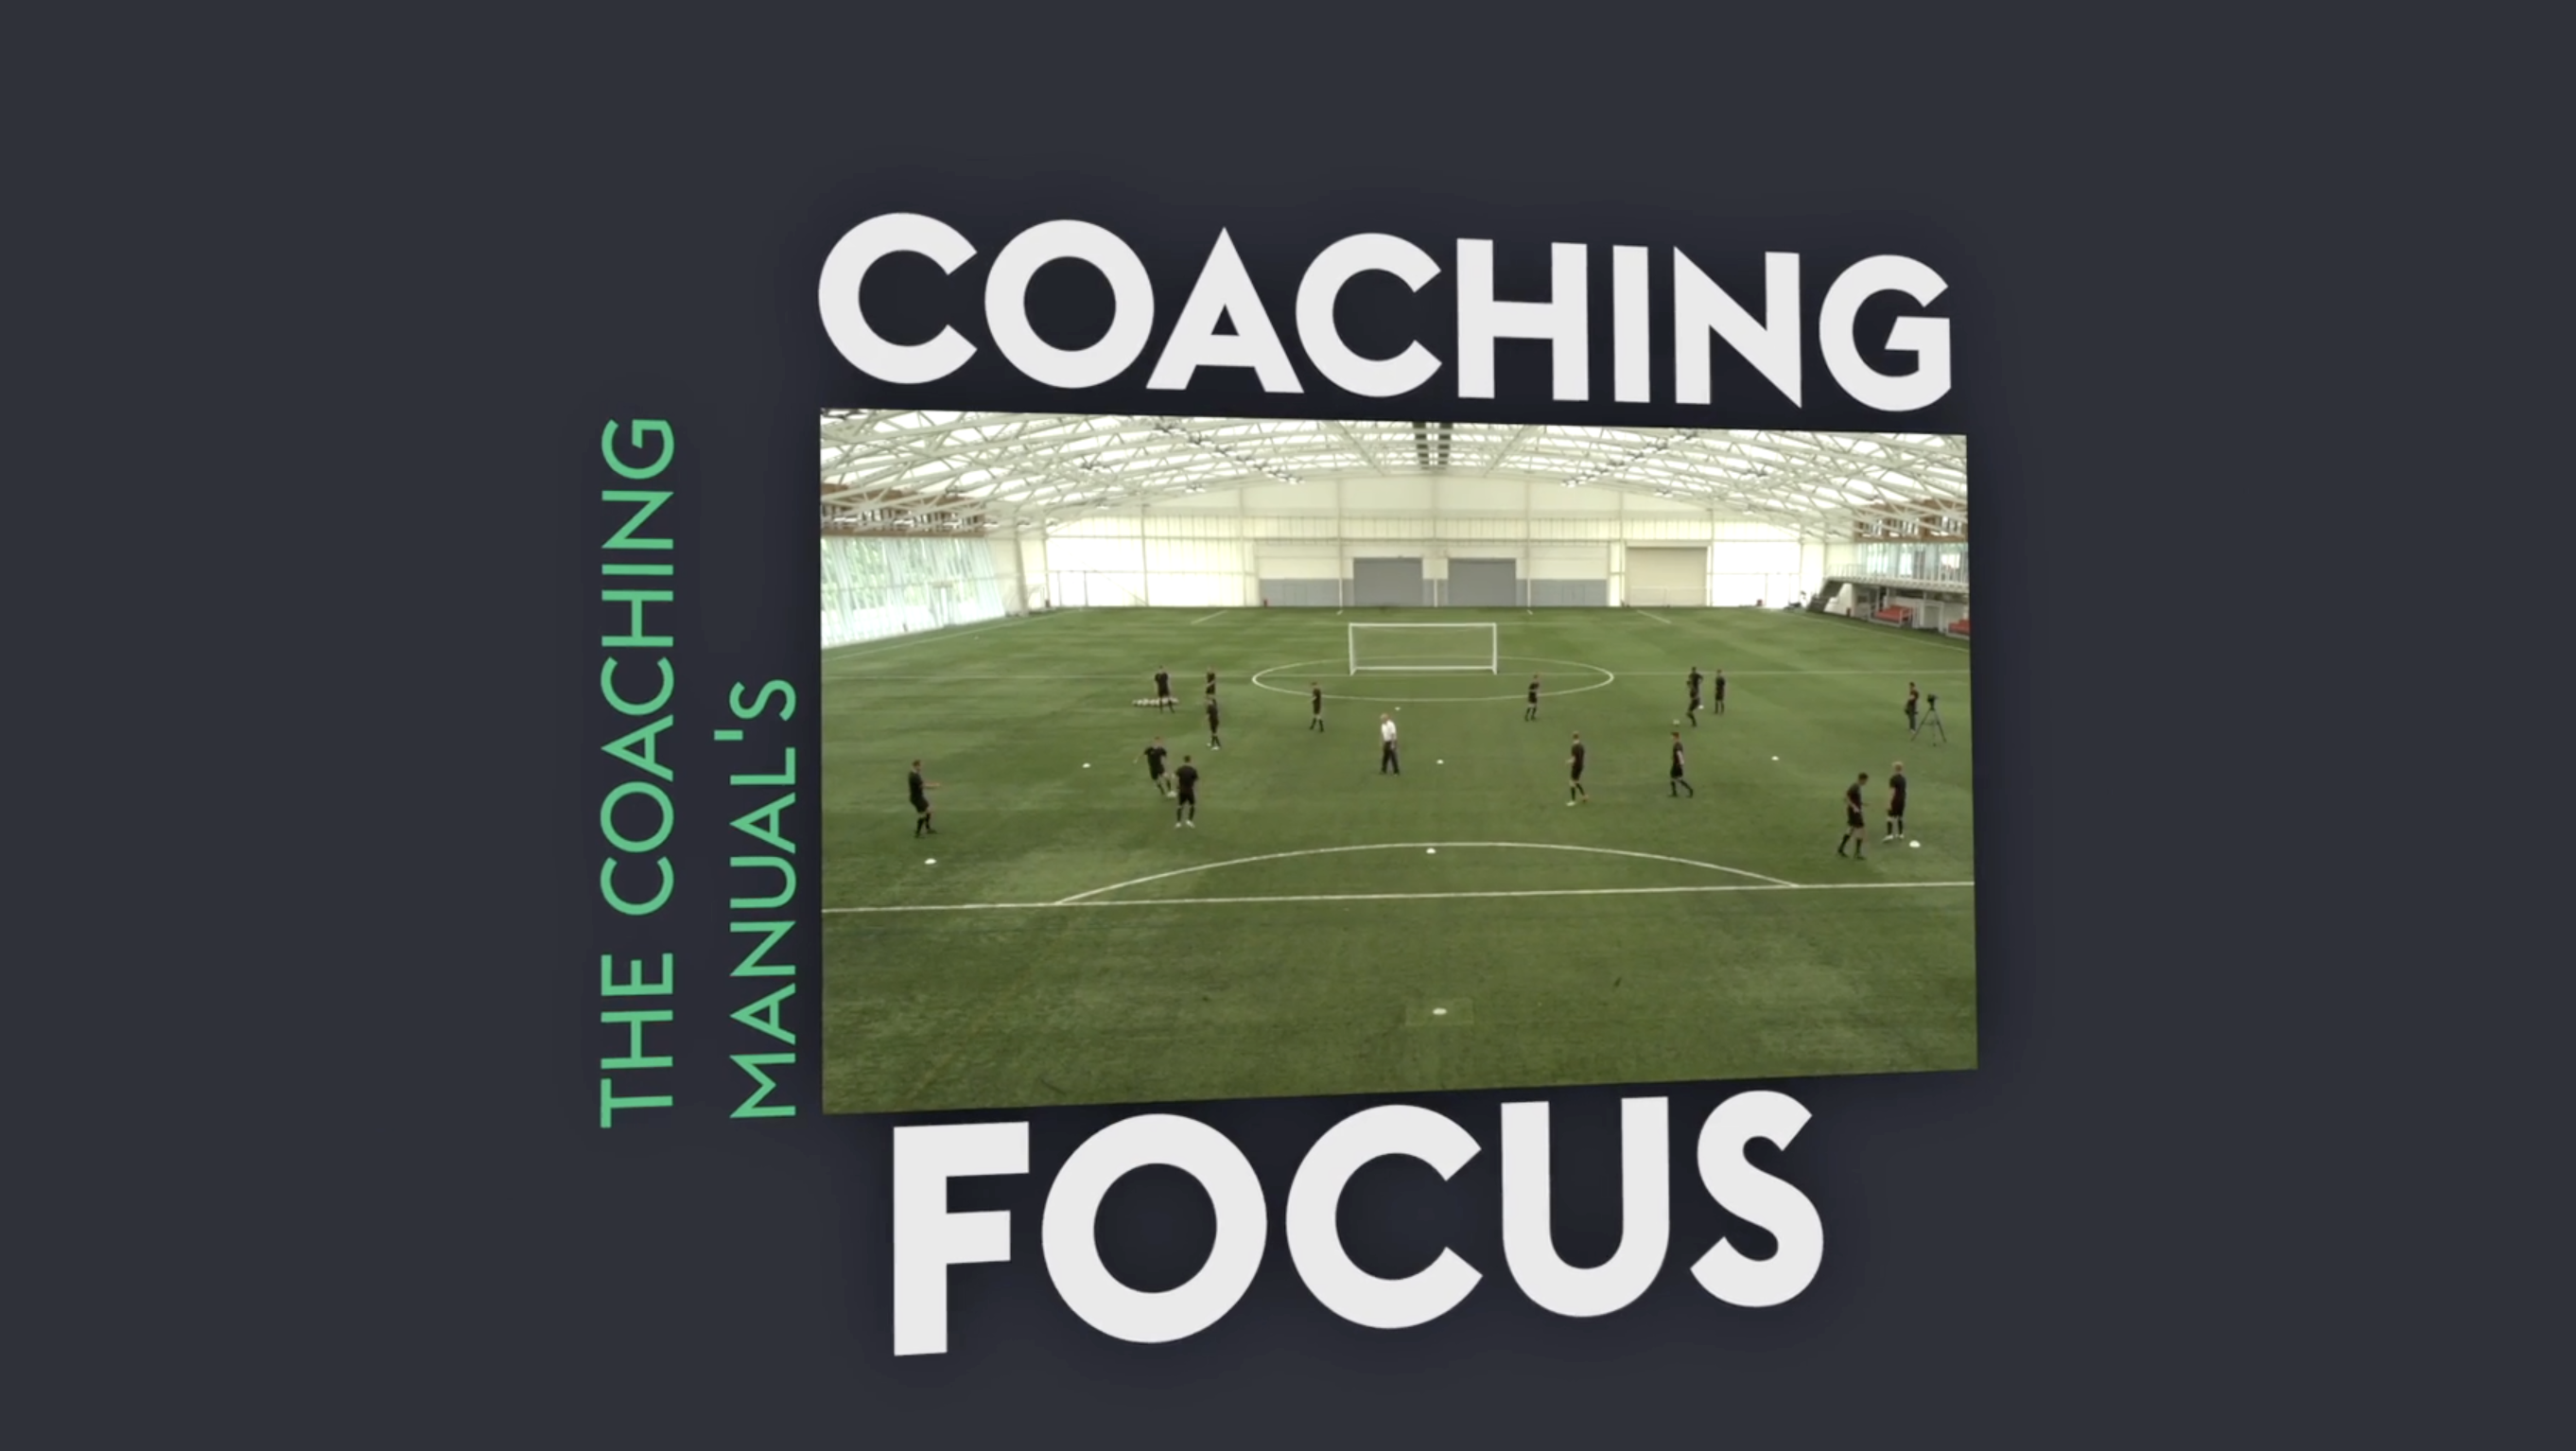 Would you like to feature in Coaching Focus?